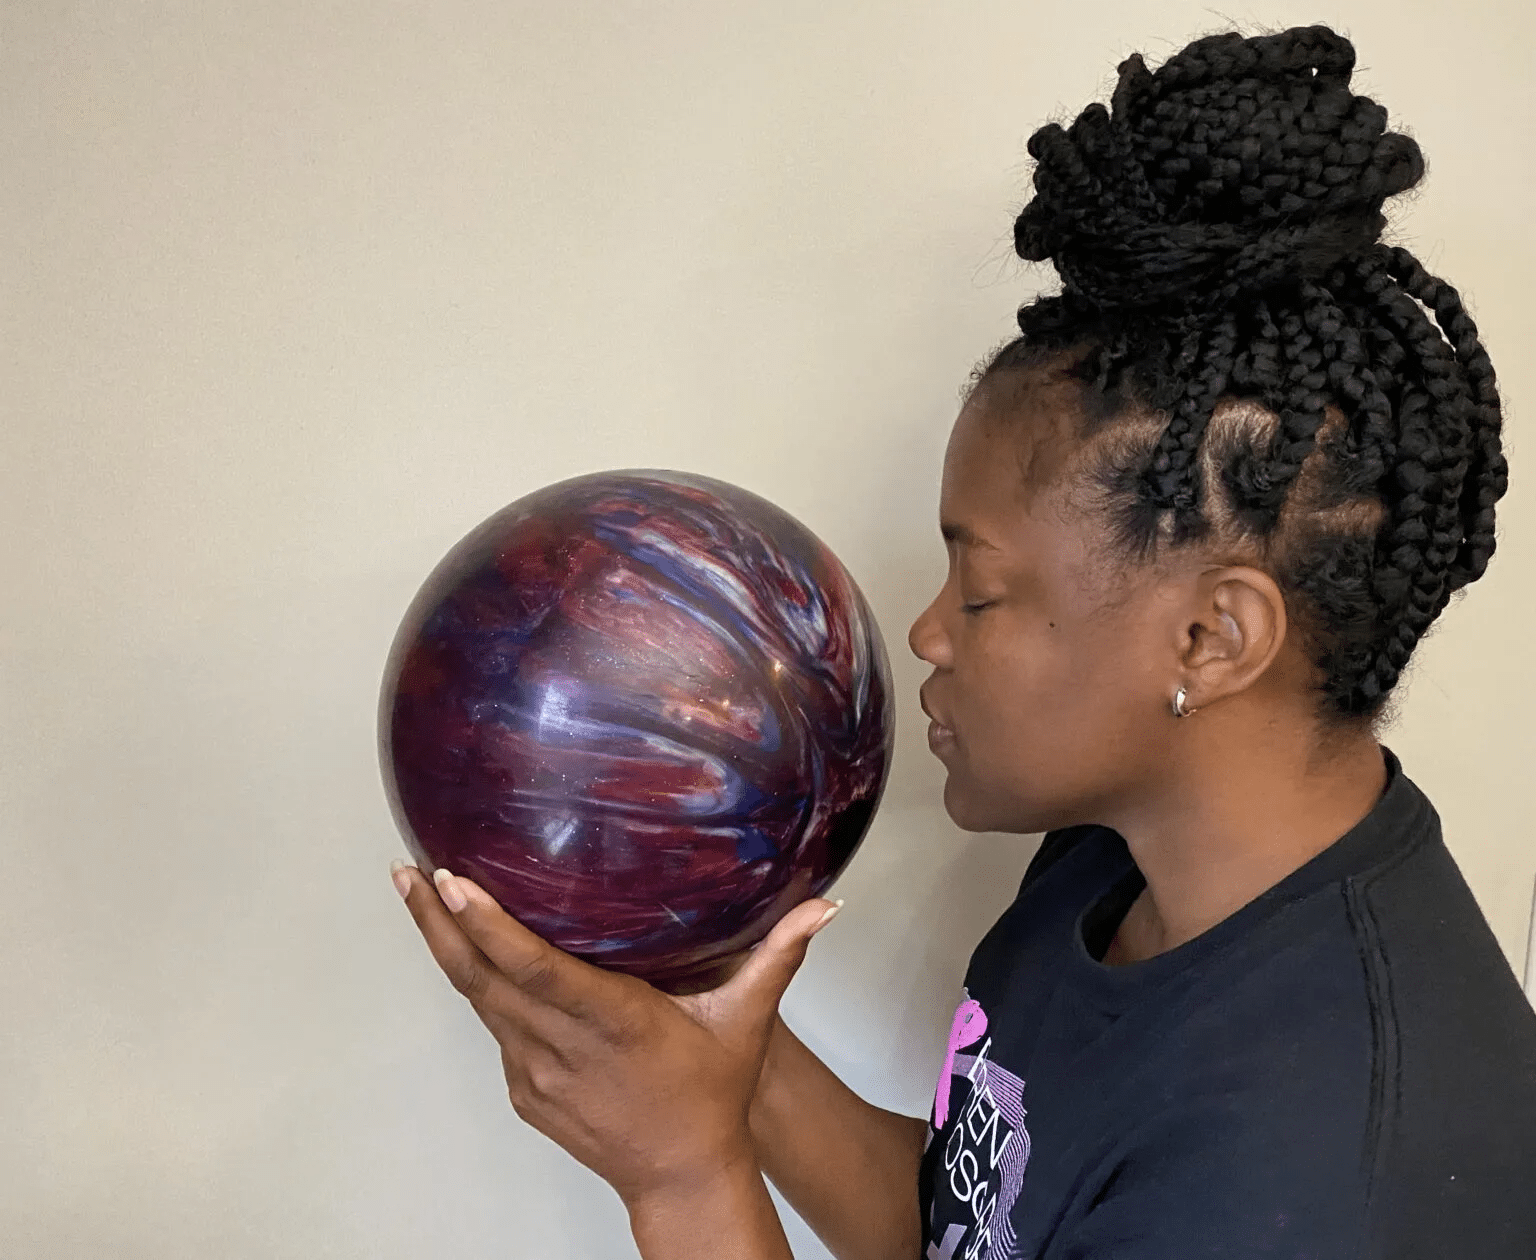 a person smelling a bowling ball